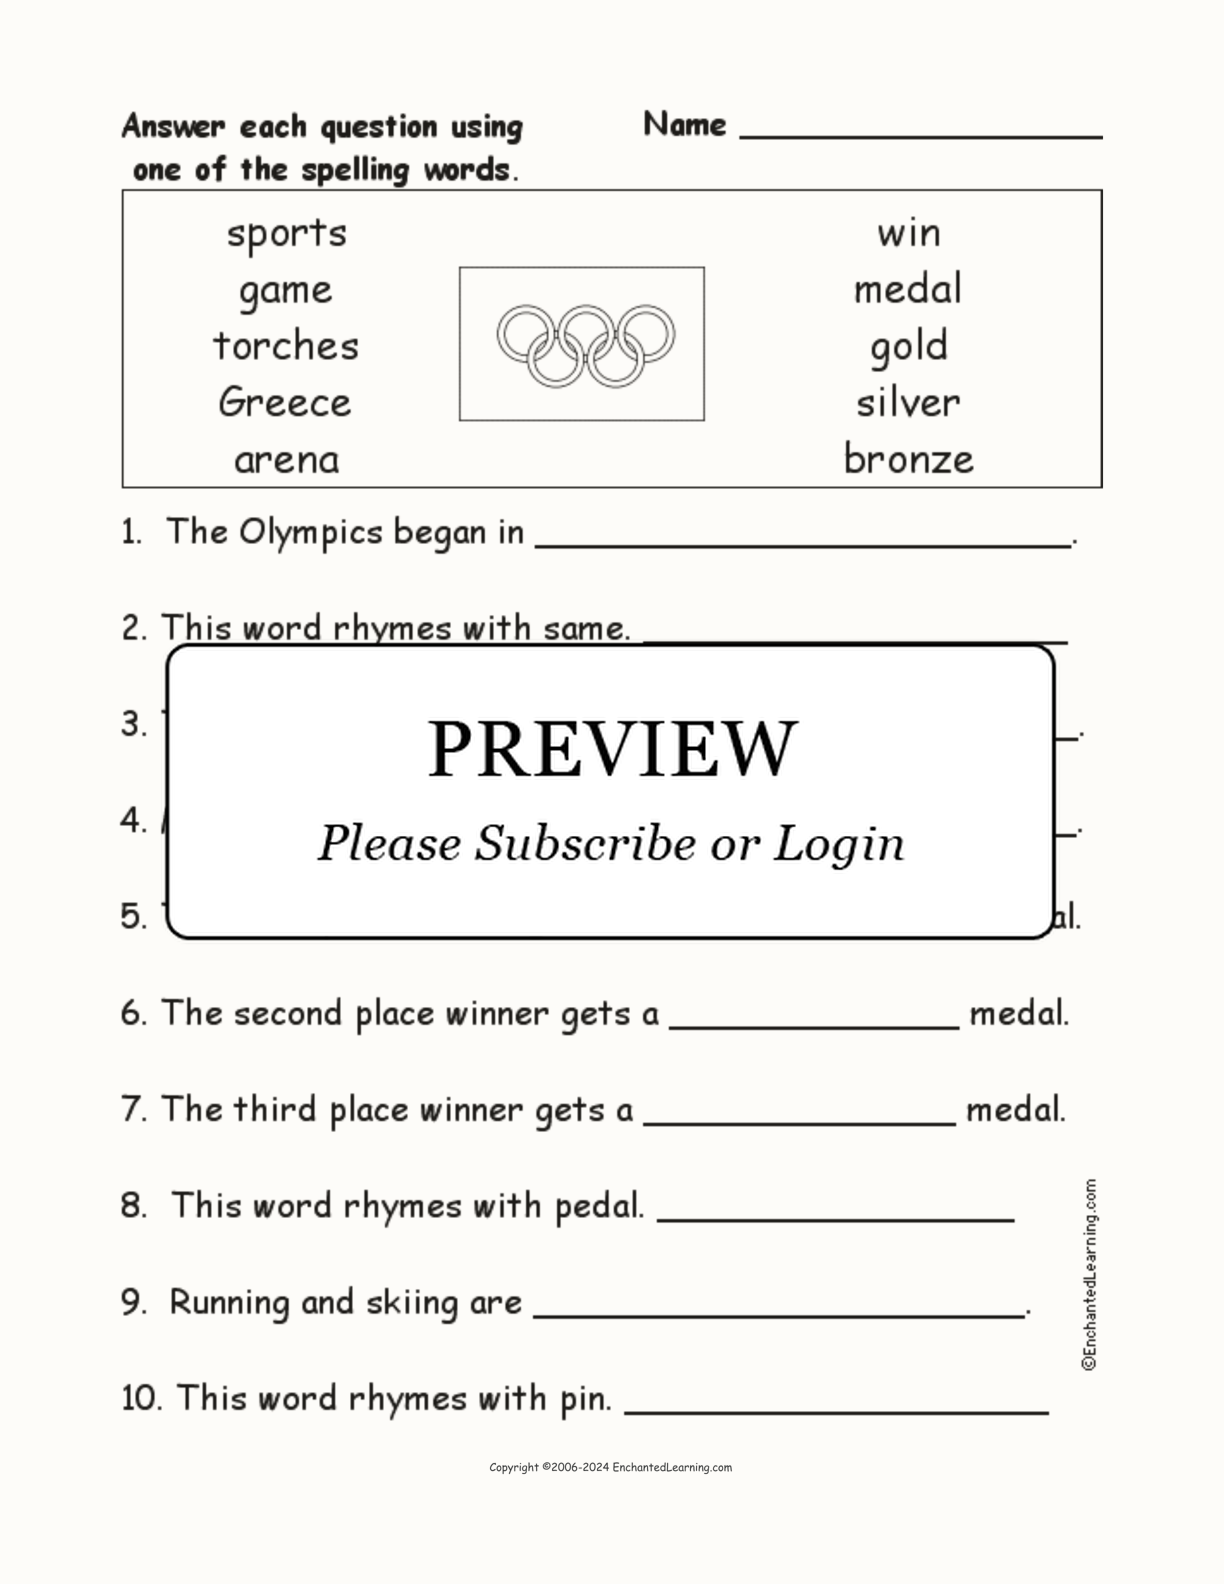 Olympics Spelling Word Questions Enchanted Learning